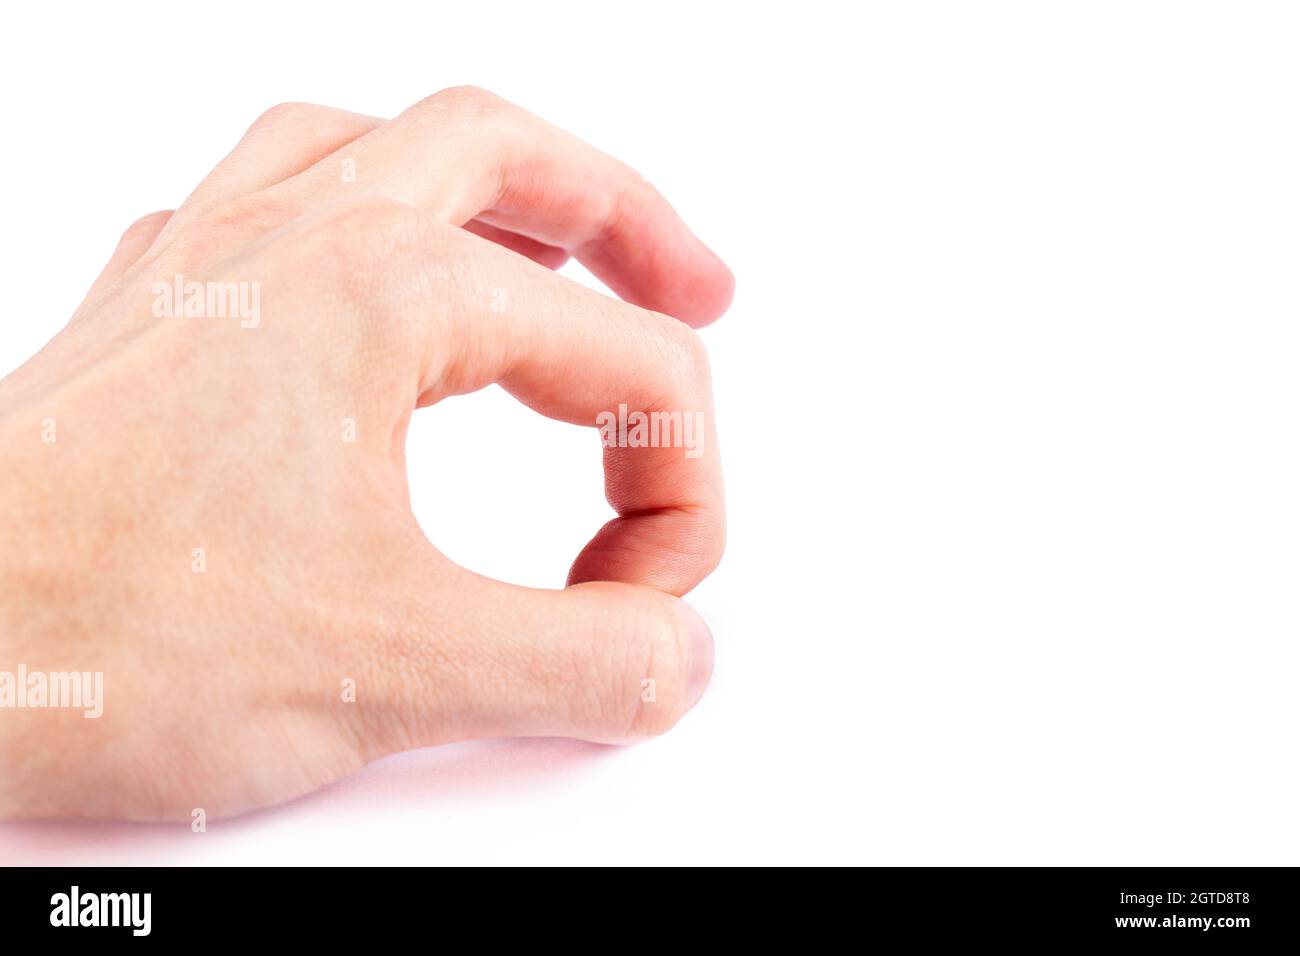 https://c8.alamy.com/comp/2GTD8T8/hand-flicking-something-away-finger-flick-gesture-closeup-isolated-on-white-background-cut-out-getting-rid-of-something-disposing-of-layoffs-un-2GTD8T8.jpg